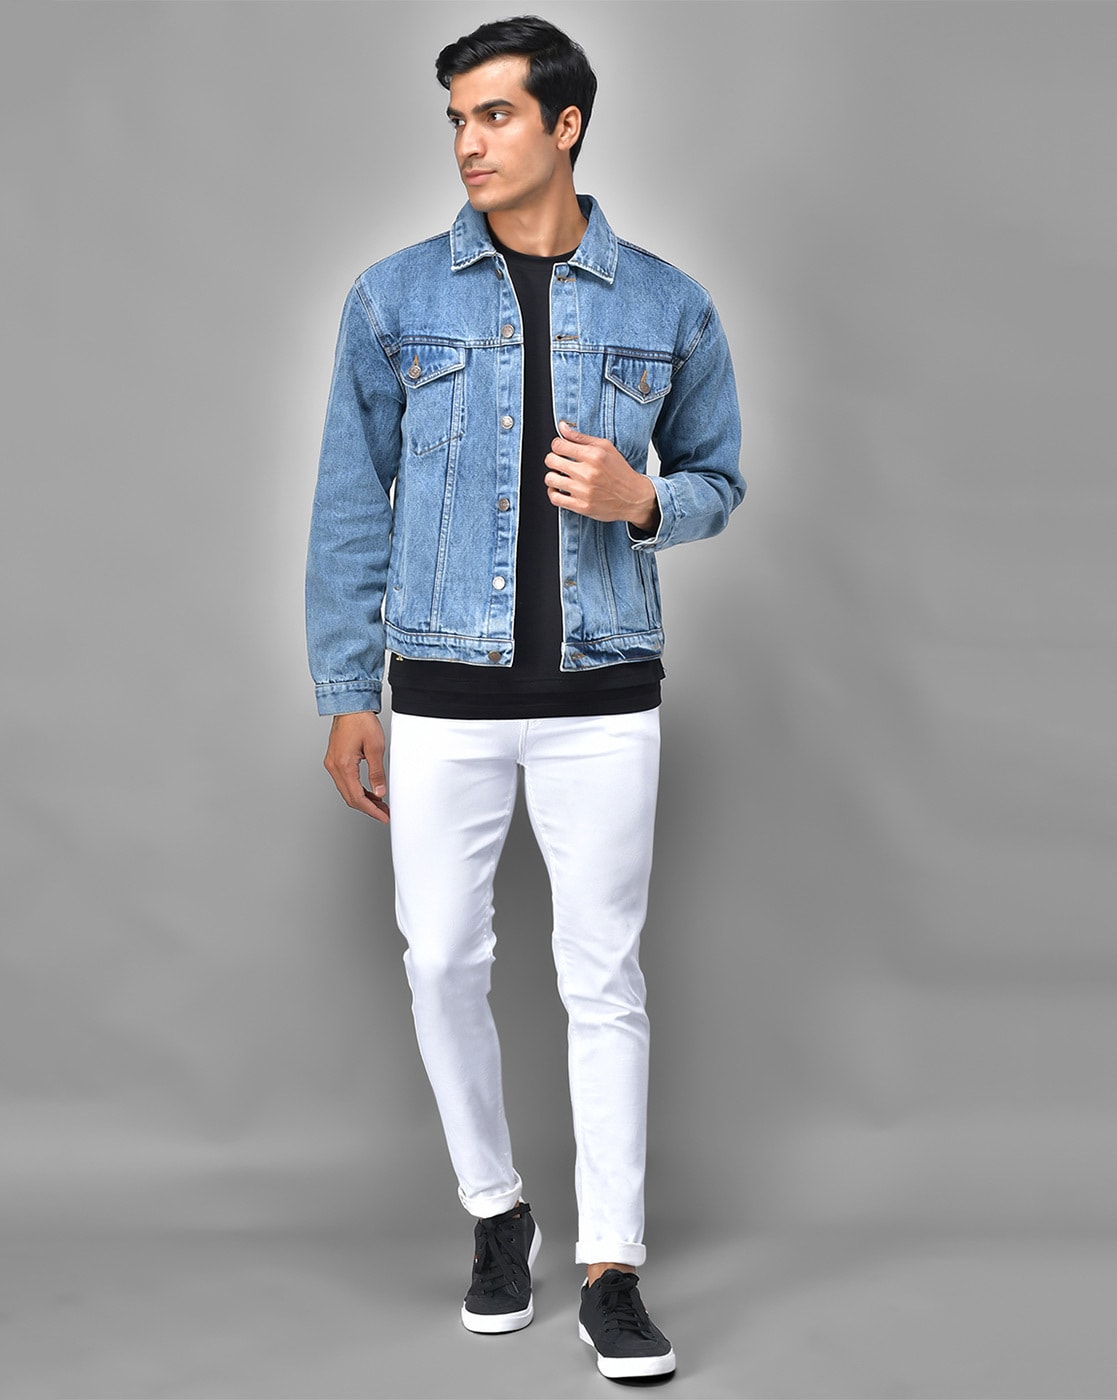 High Quality Denim Jacket at Best Price in Delhi | Kotty Lifestyle Private  Limited